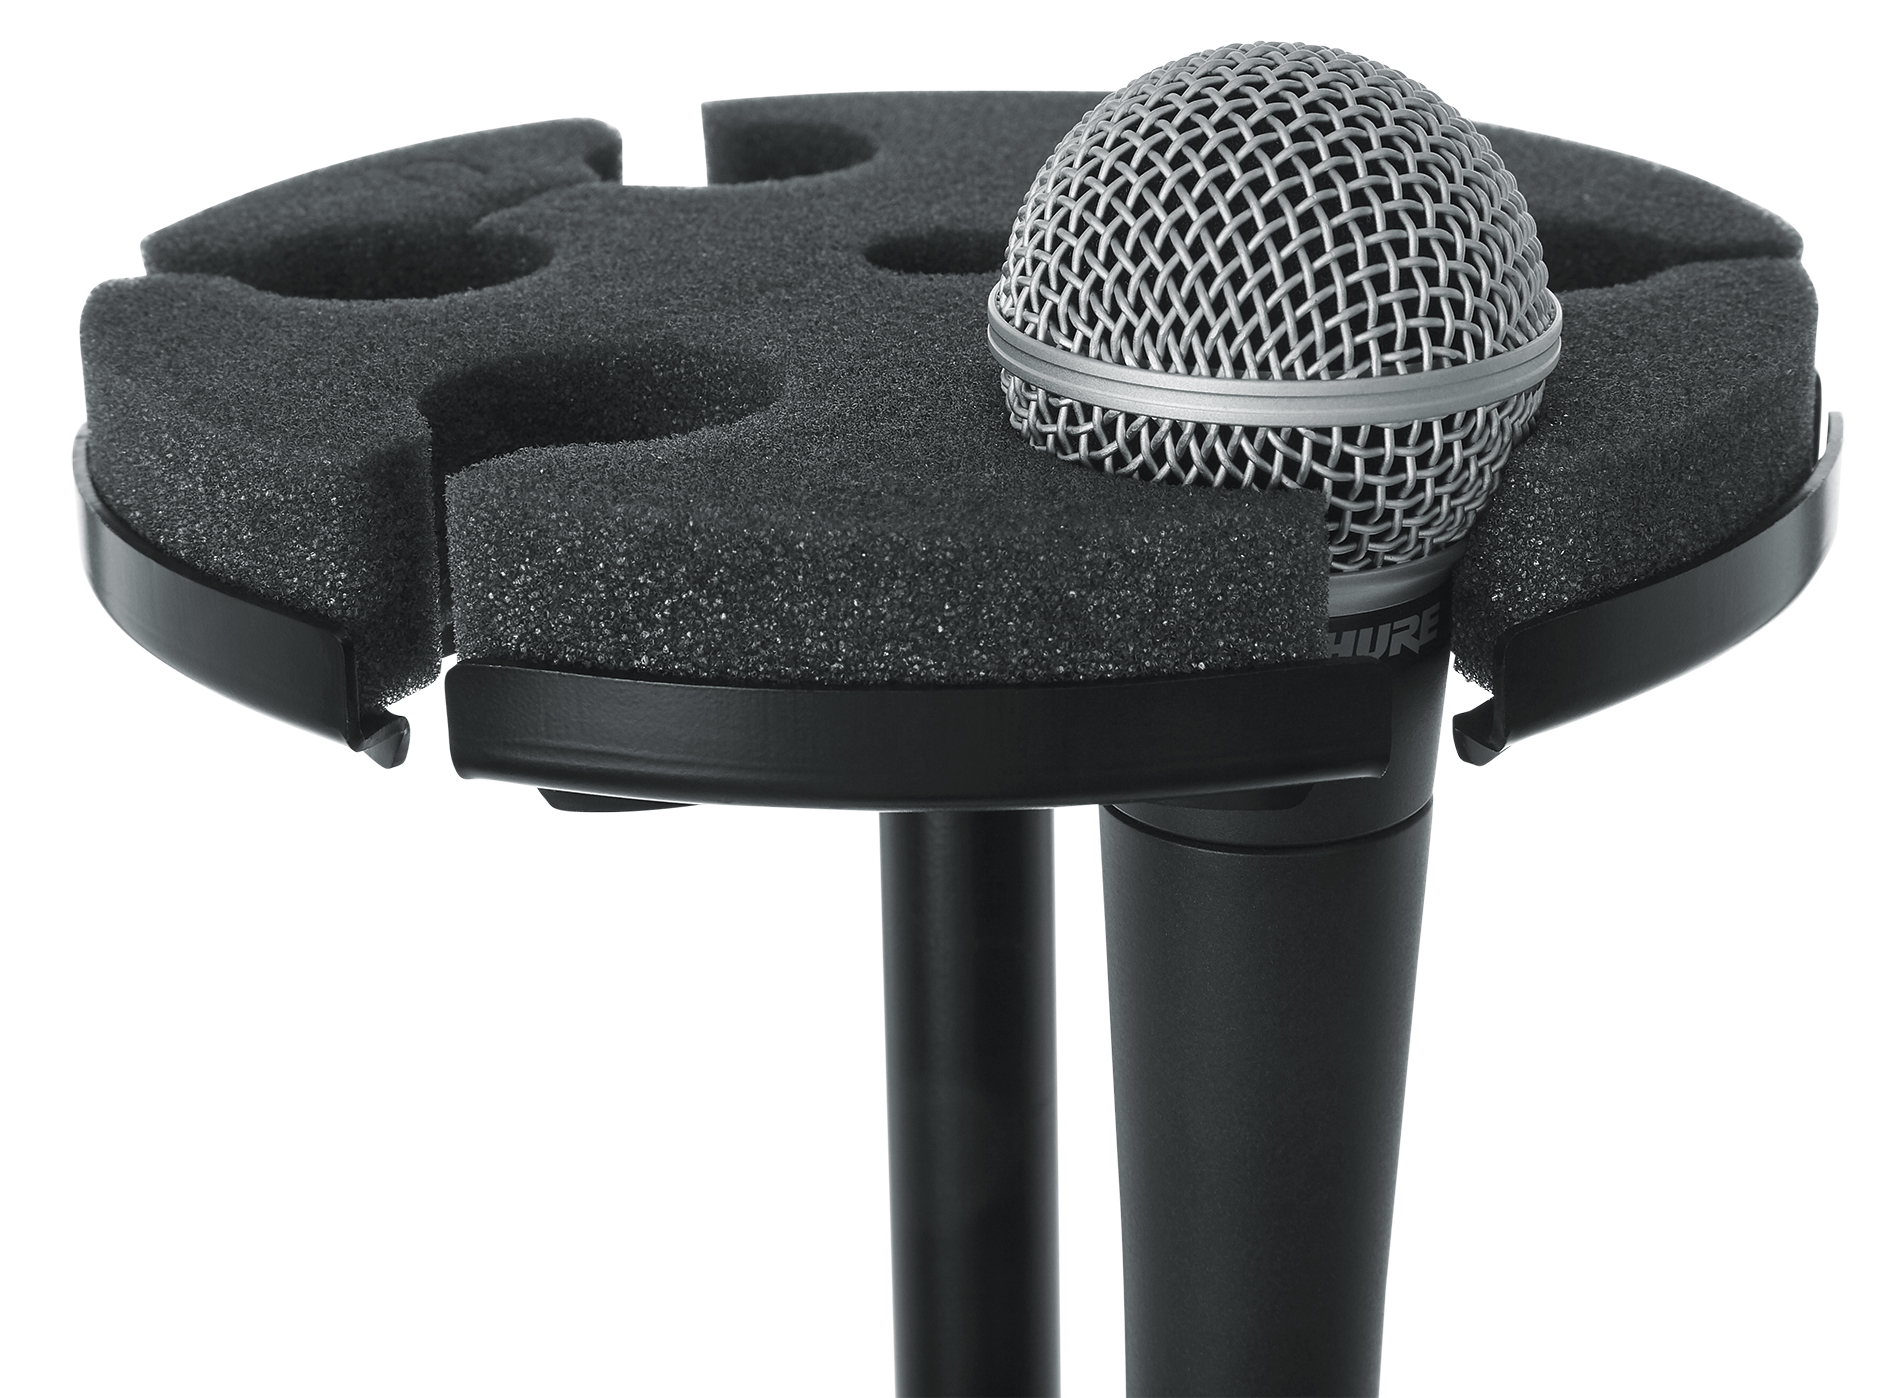 Multi Microphone Tray Designed To Hold 6 Mics-GFW-MIC-6TRAY - Gator Cases